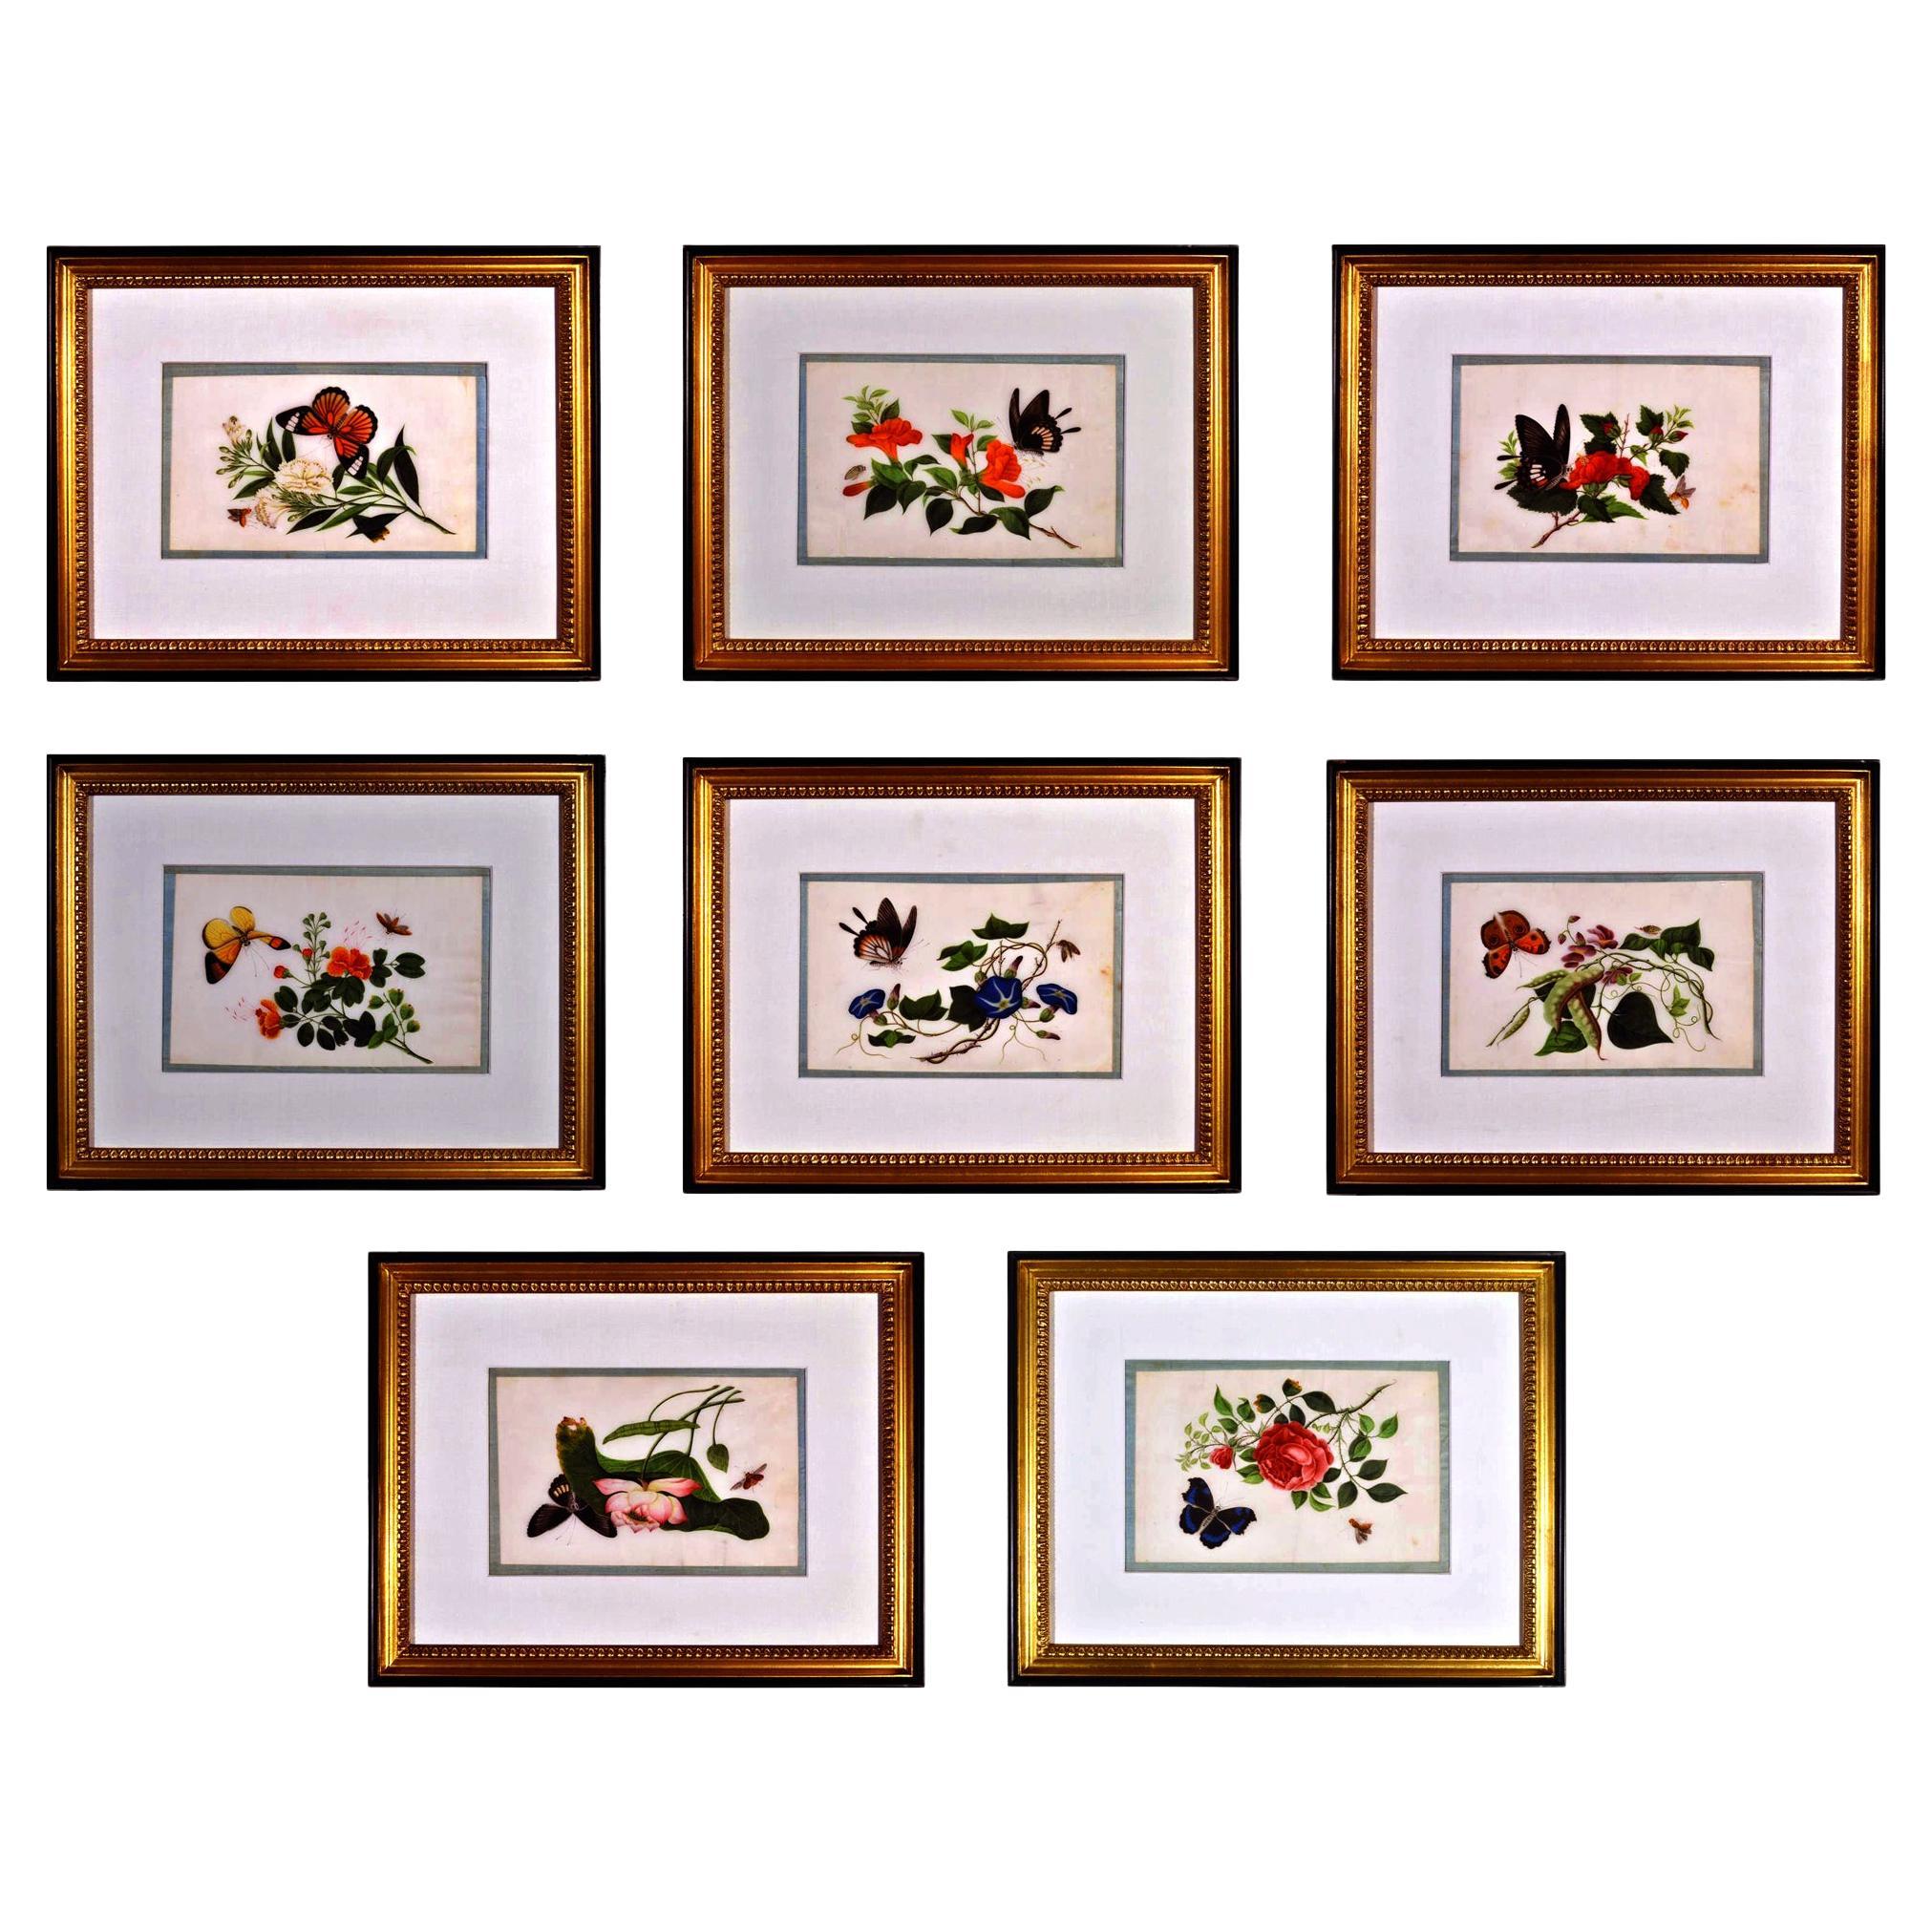 China Trade Framed Pith Paper Set of Pictures of Butterflies and Plants For Sale